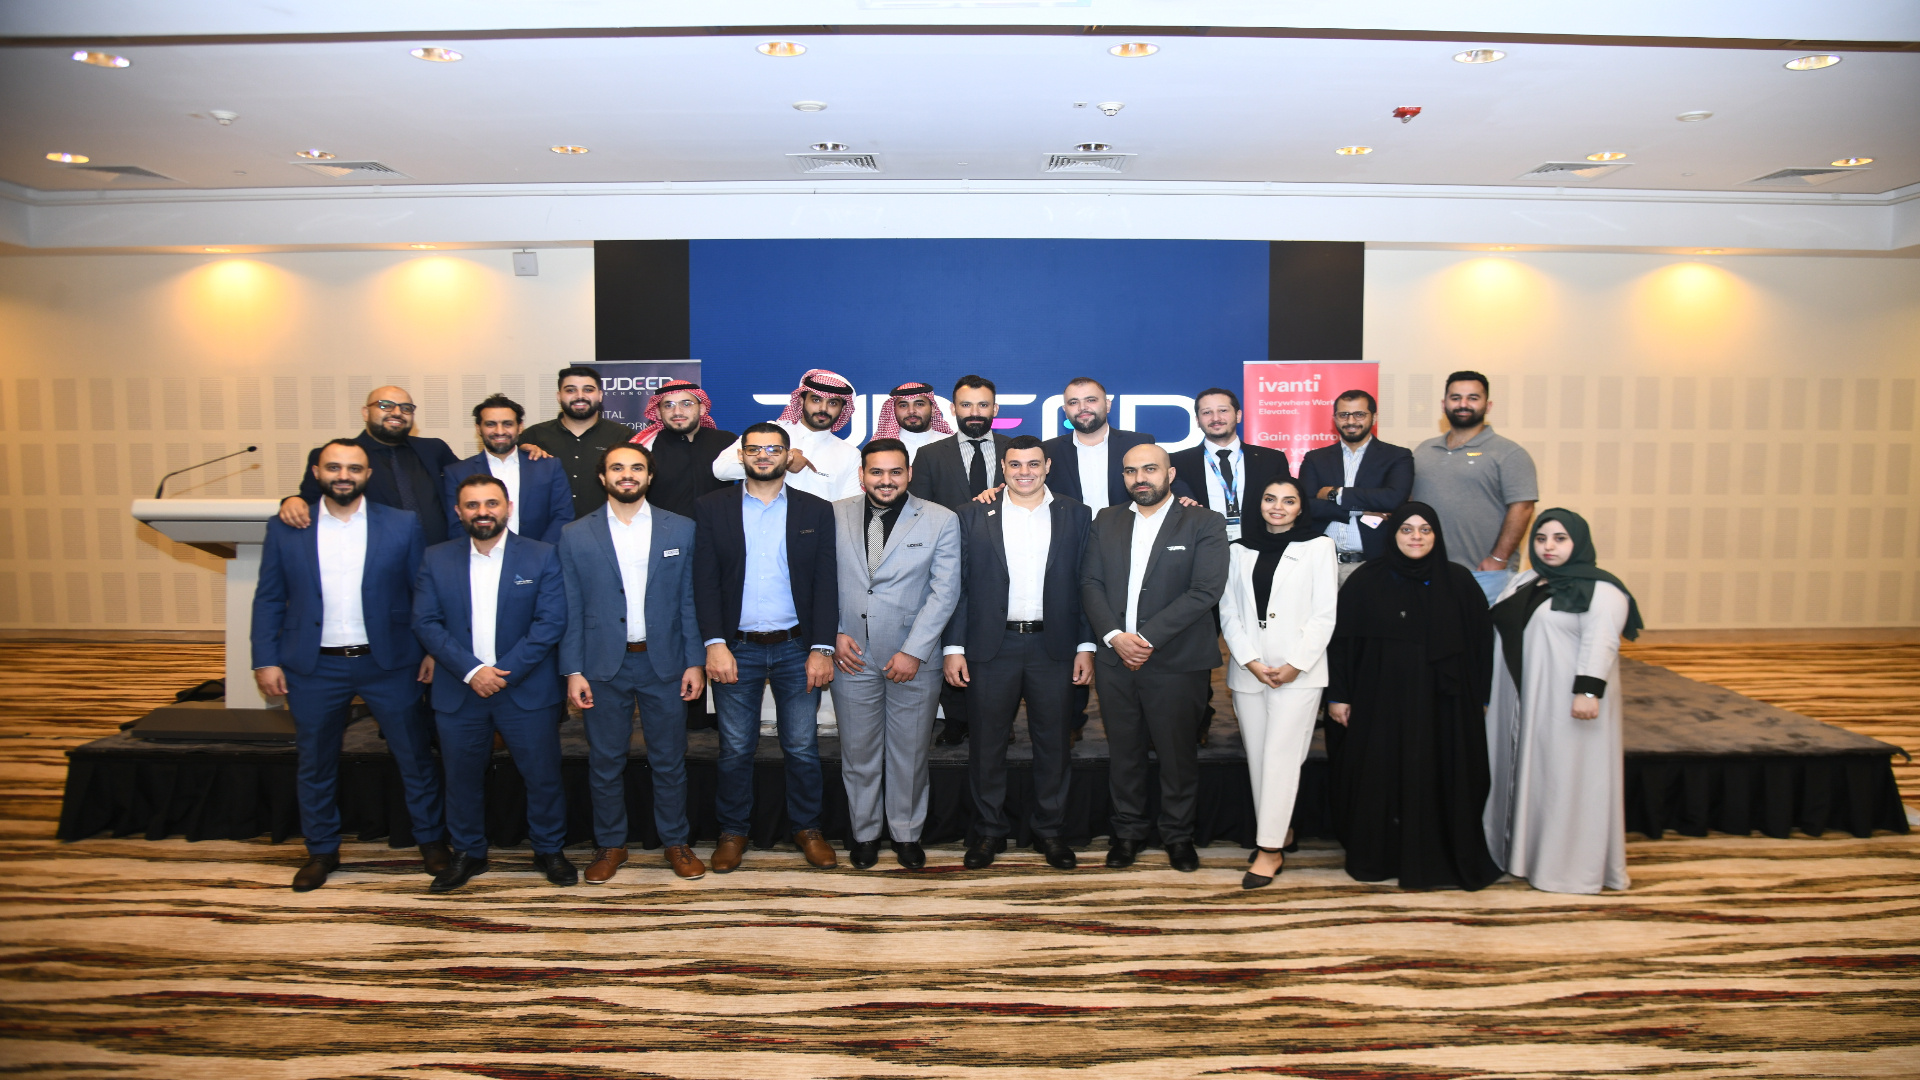 TJDEED and Ivanti Transform the Landscape of Work at”Elevating the Future of Everywhere Work” Seminar in Riyadh